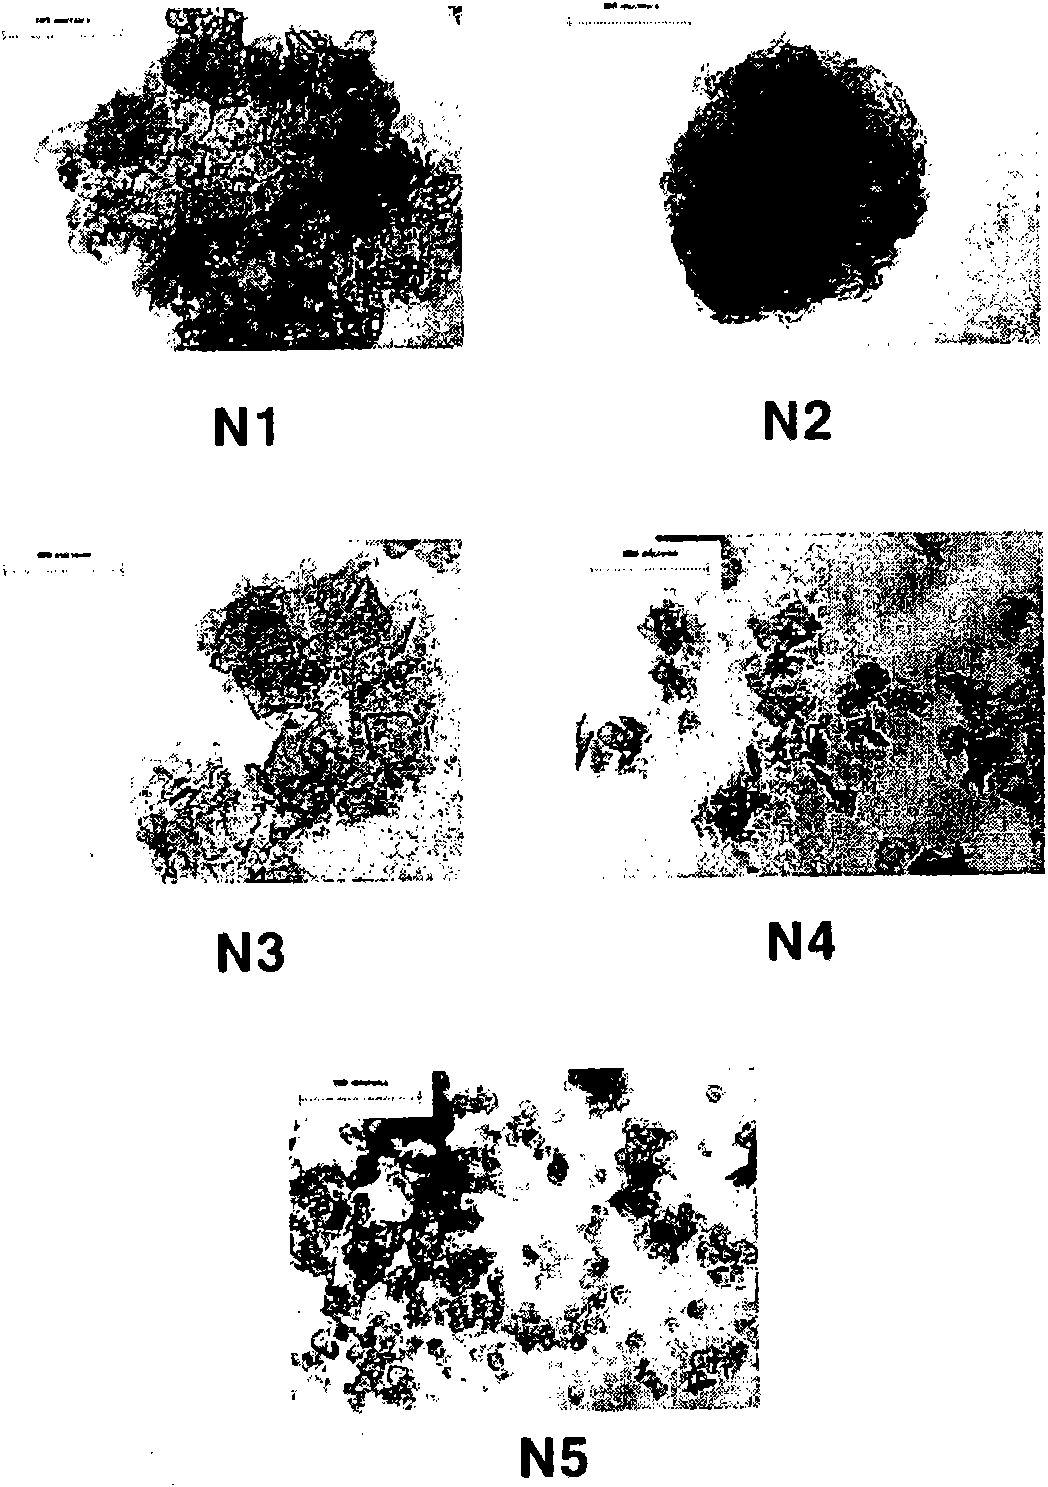 Method for achieving high purity separation and refinement by controlling morphology and particle size of 2, 6-dimethylnaphthalene crystals